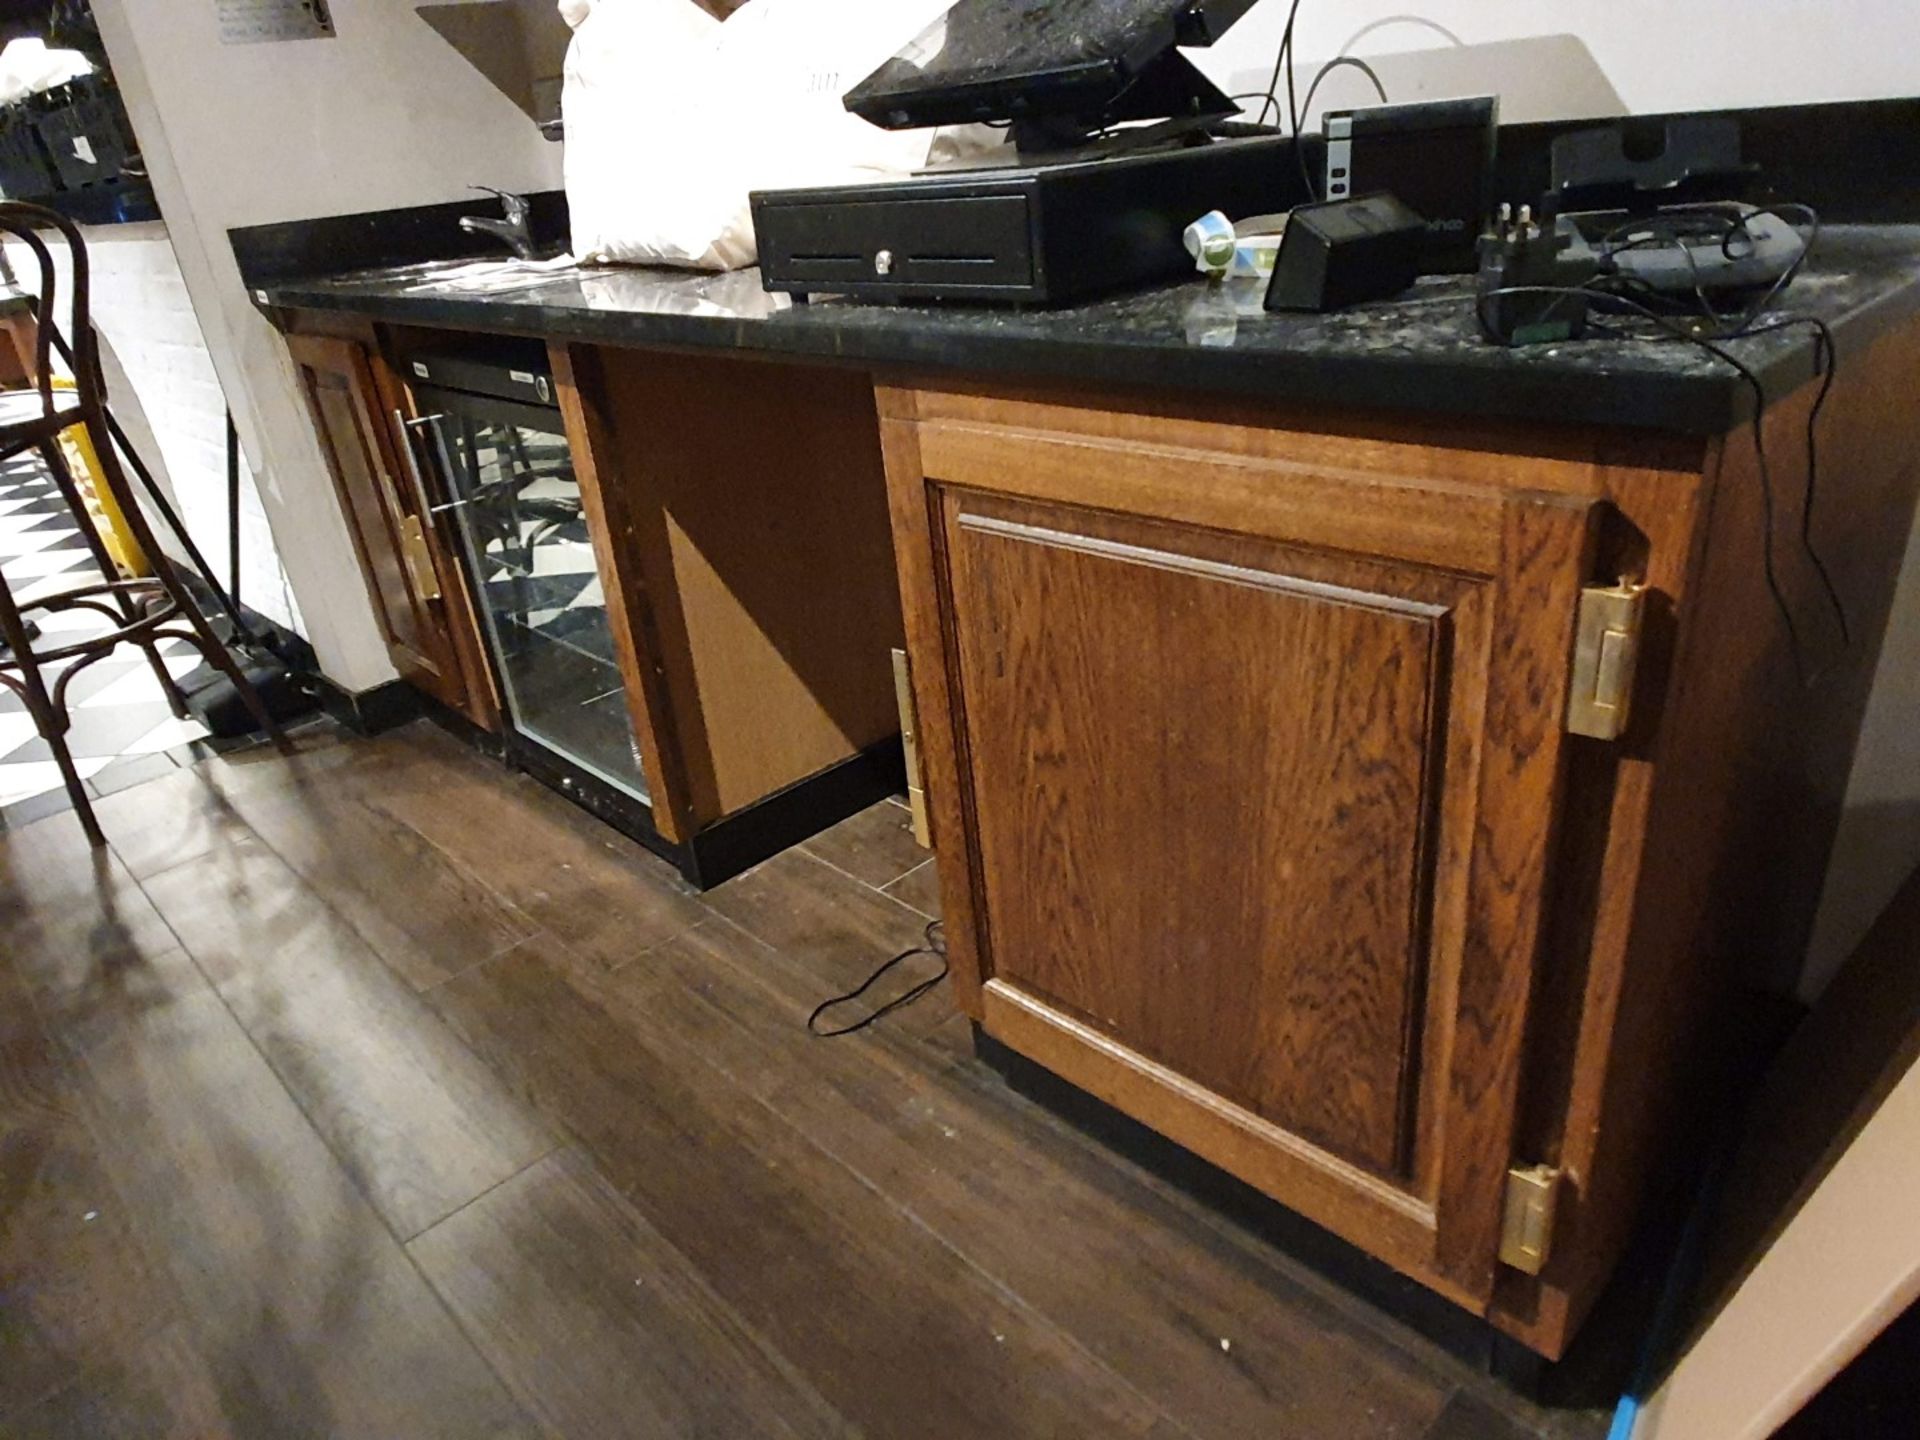 1 x Preparation Counter Unit With Oak Doors and Brass Hardware, Black Granite Work Surface and - Image 3 of 3